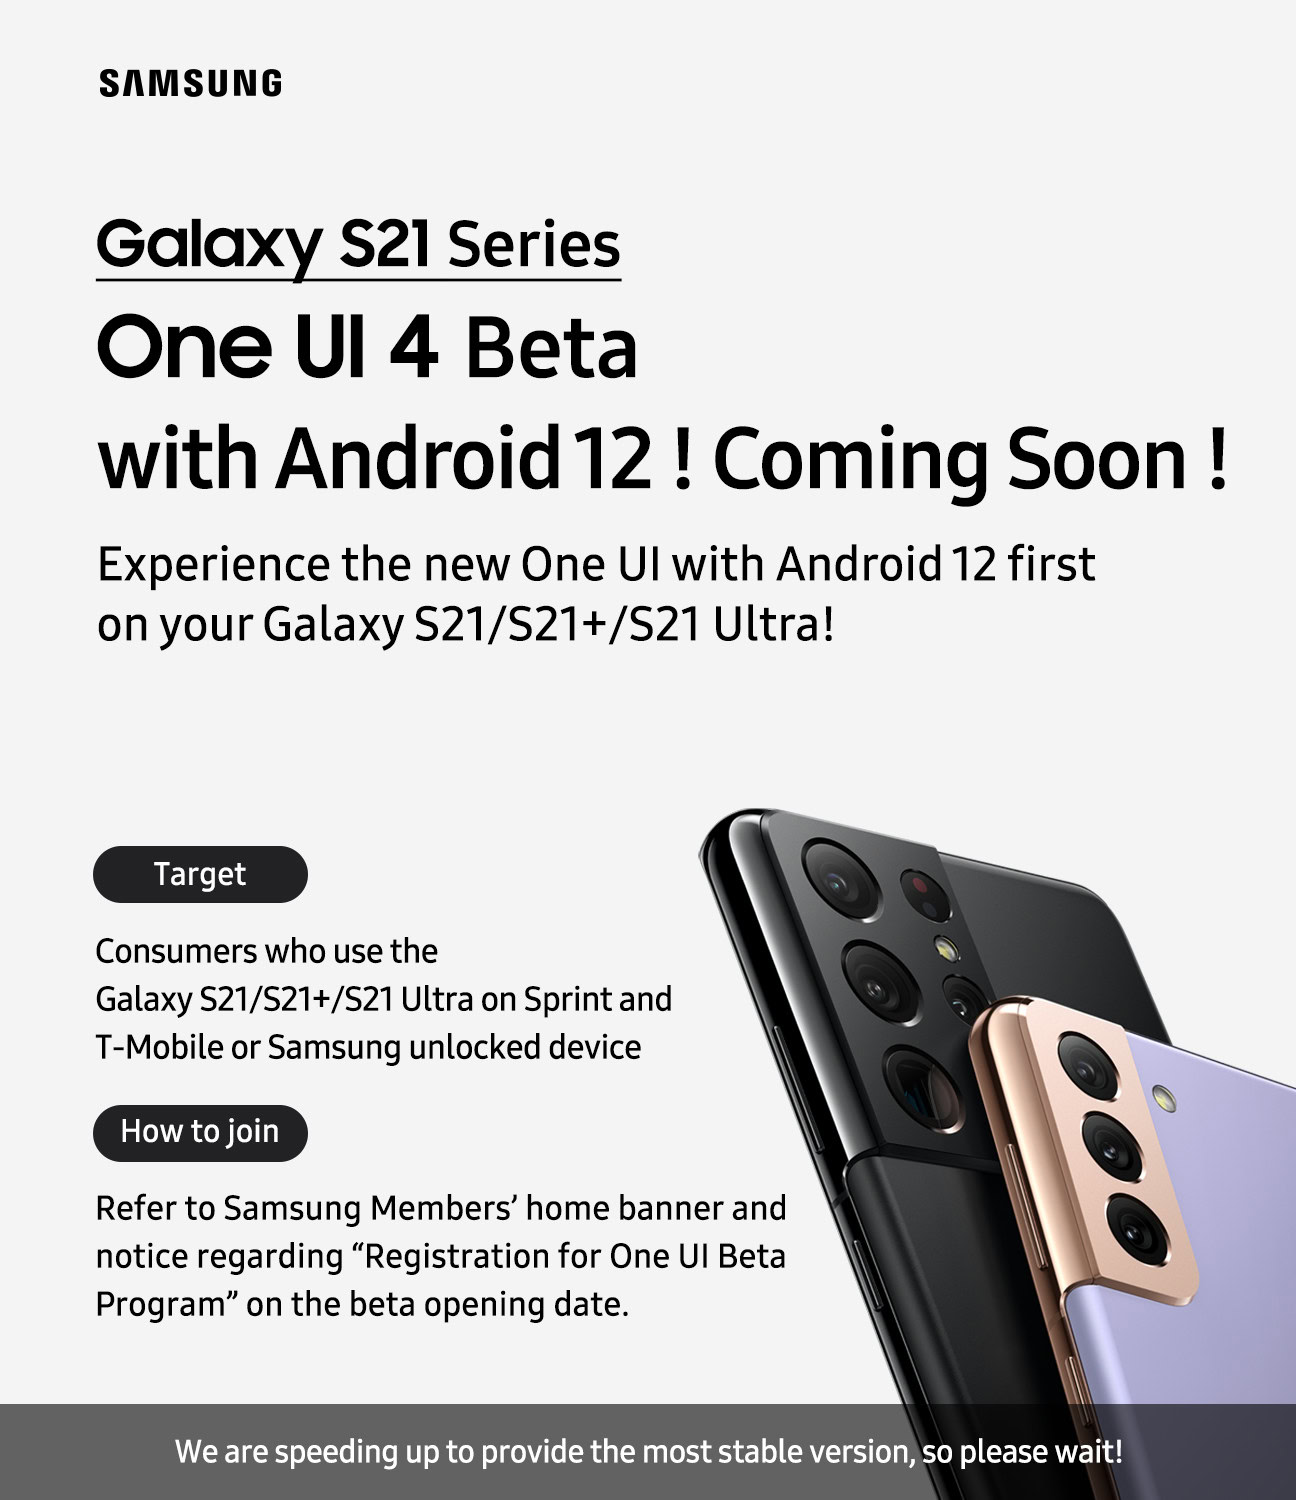 Galaxy S21 series One UI 4.0 beta poster for the US.